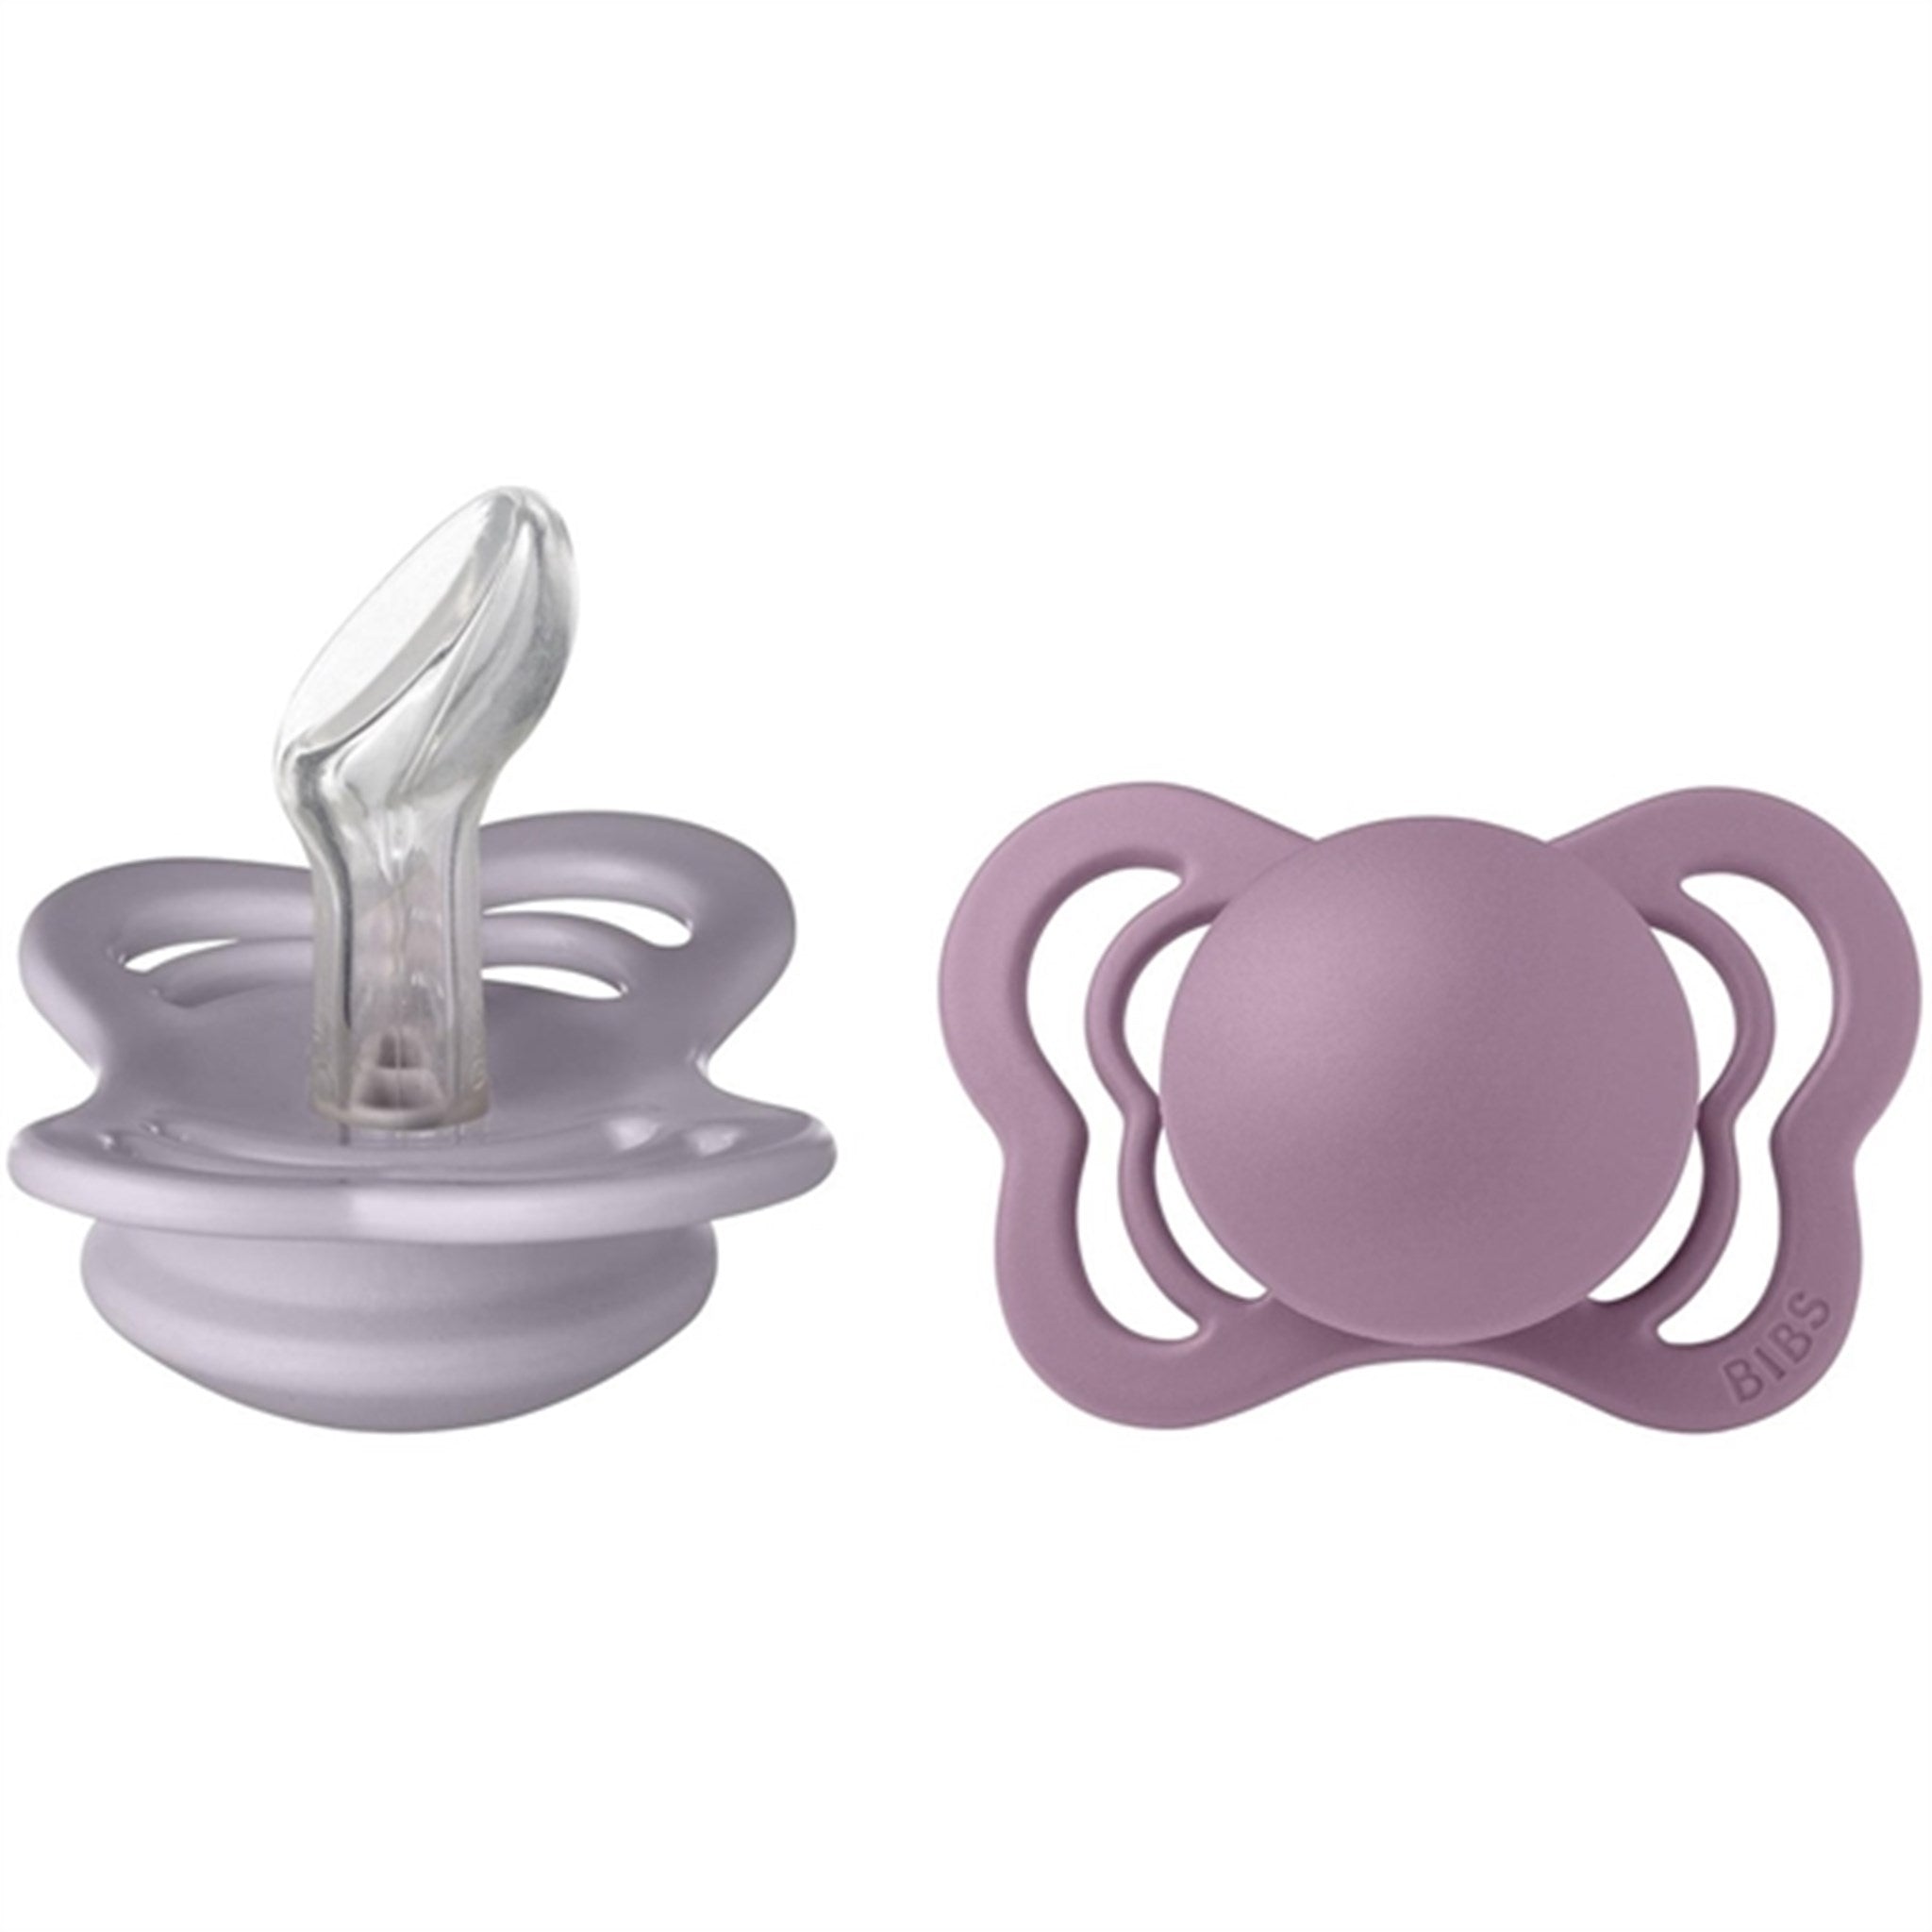 Bibs Couture Silicone Pacifier 2-pack Fossil Grey/Mauve